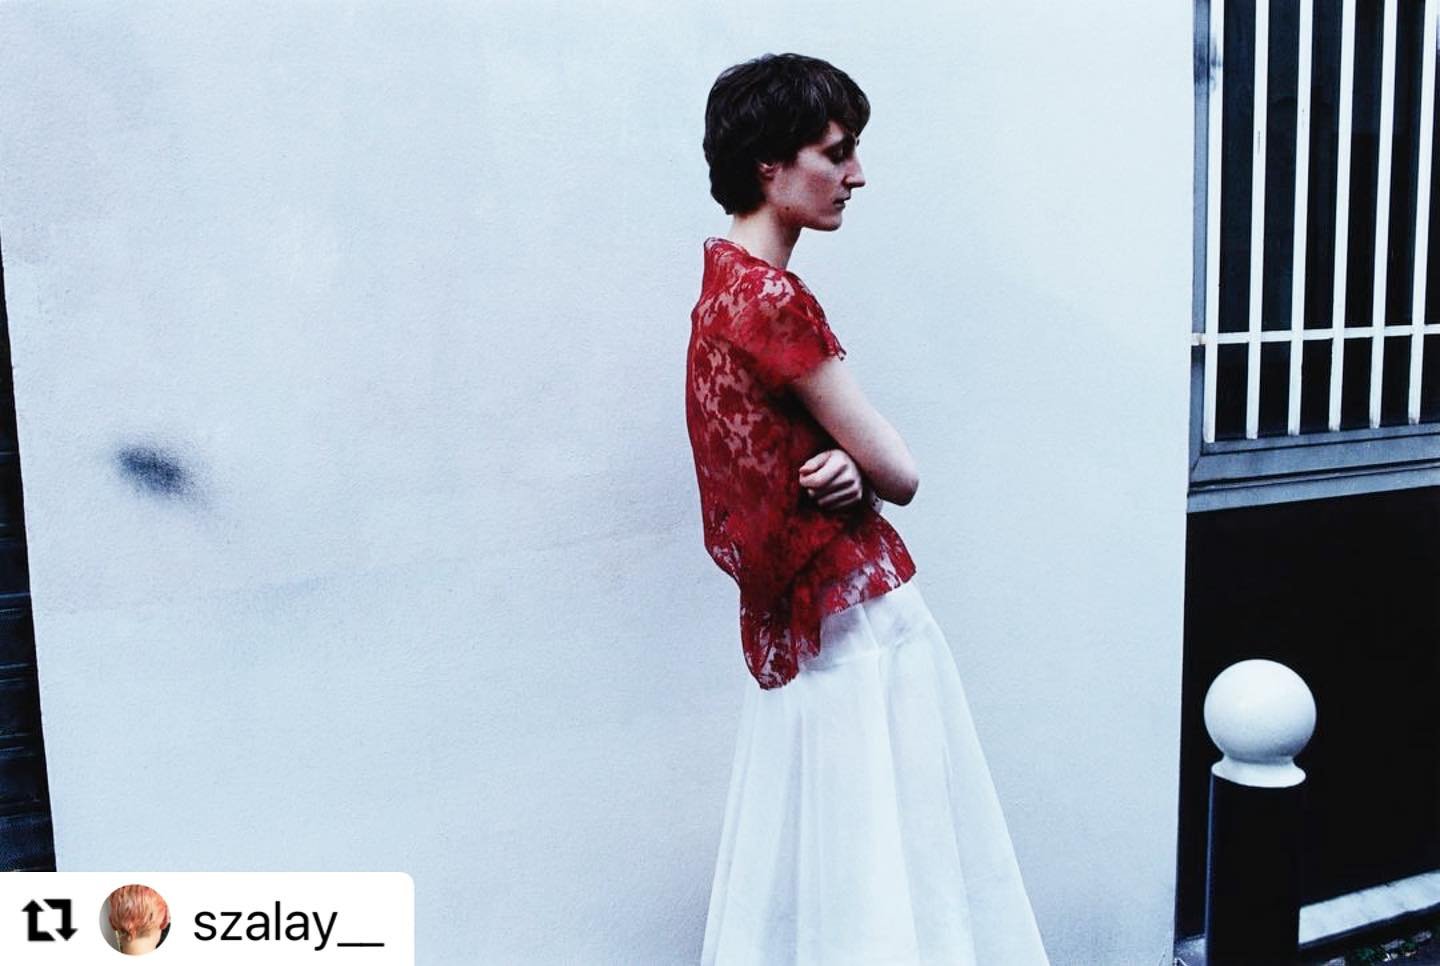 Newromantics!
&hellip;
&hellip;
&hellip;
🙏 @szalay__ for having us in your #parisshoot #archive #archivefashion #collectorsroomberlin #nakedwithoutus #fashioninfilm #costumedesign #editorialfashion #streetwear❤️ #lace #newromantics #commedescostumes